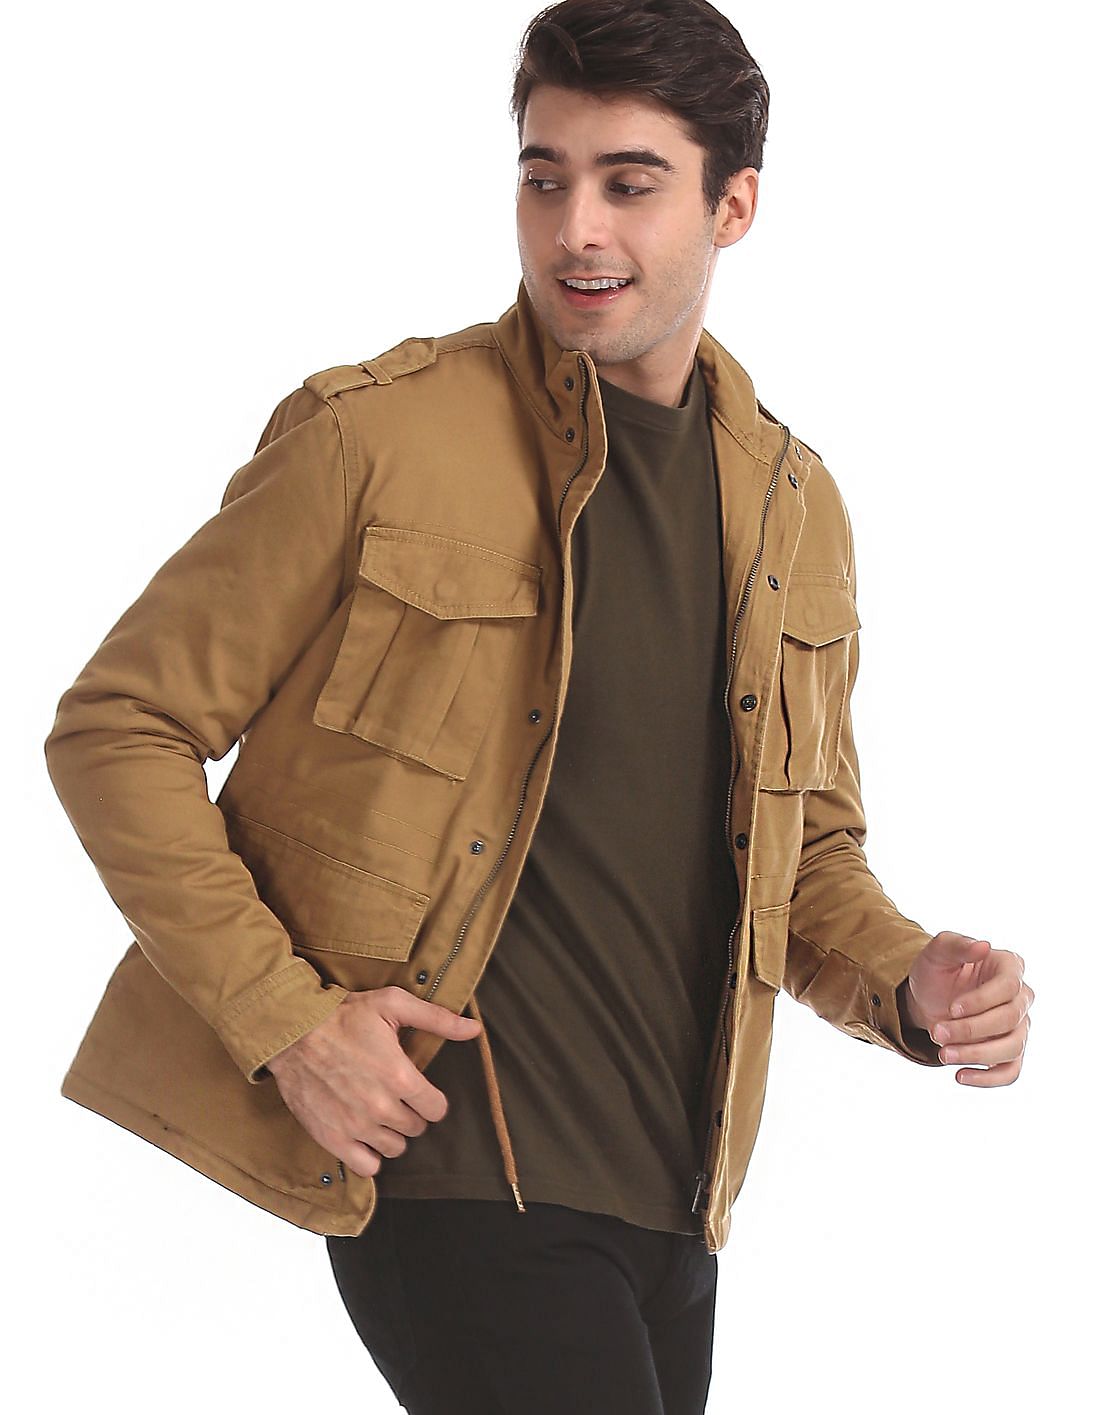 Buy Aeropostale Brown Sherpa Lined Twill Jacket - NNNOW.com